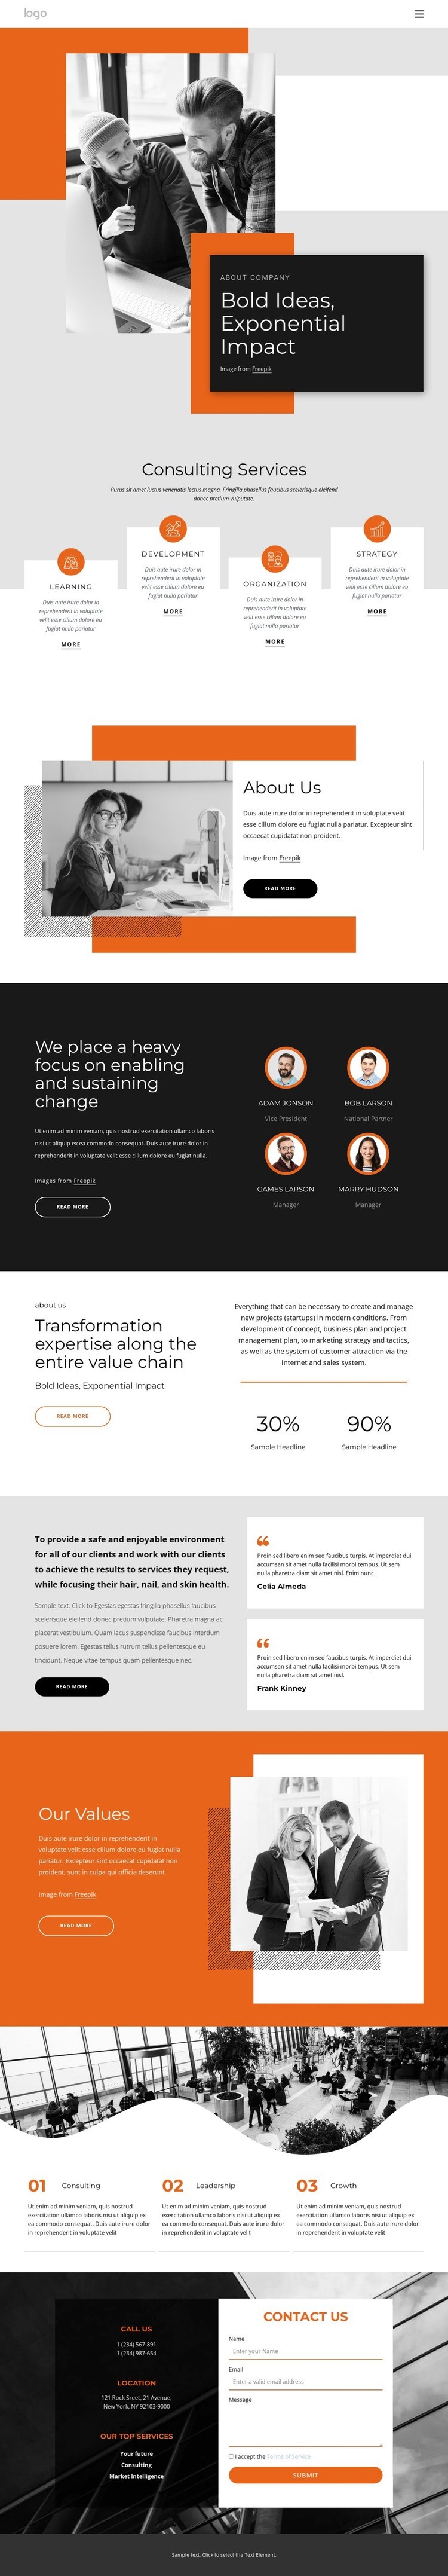 We measure our success by the success of our clients Webflow Template Alternative